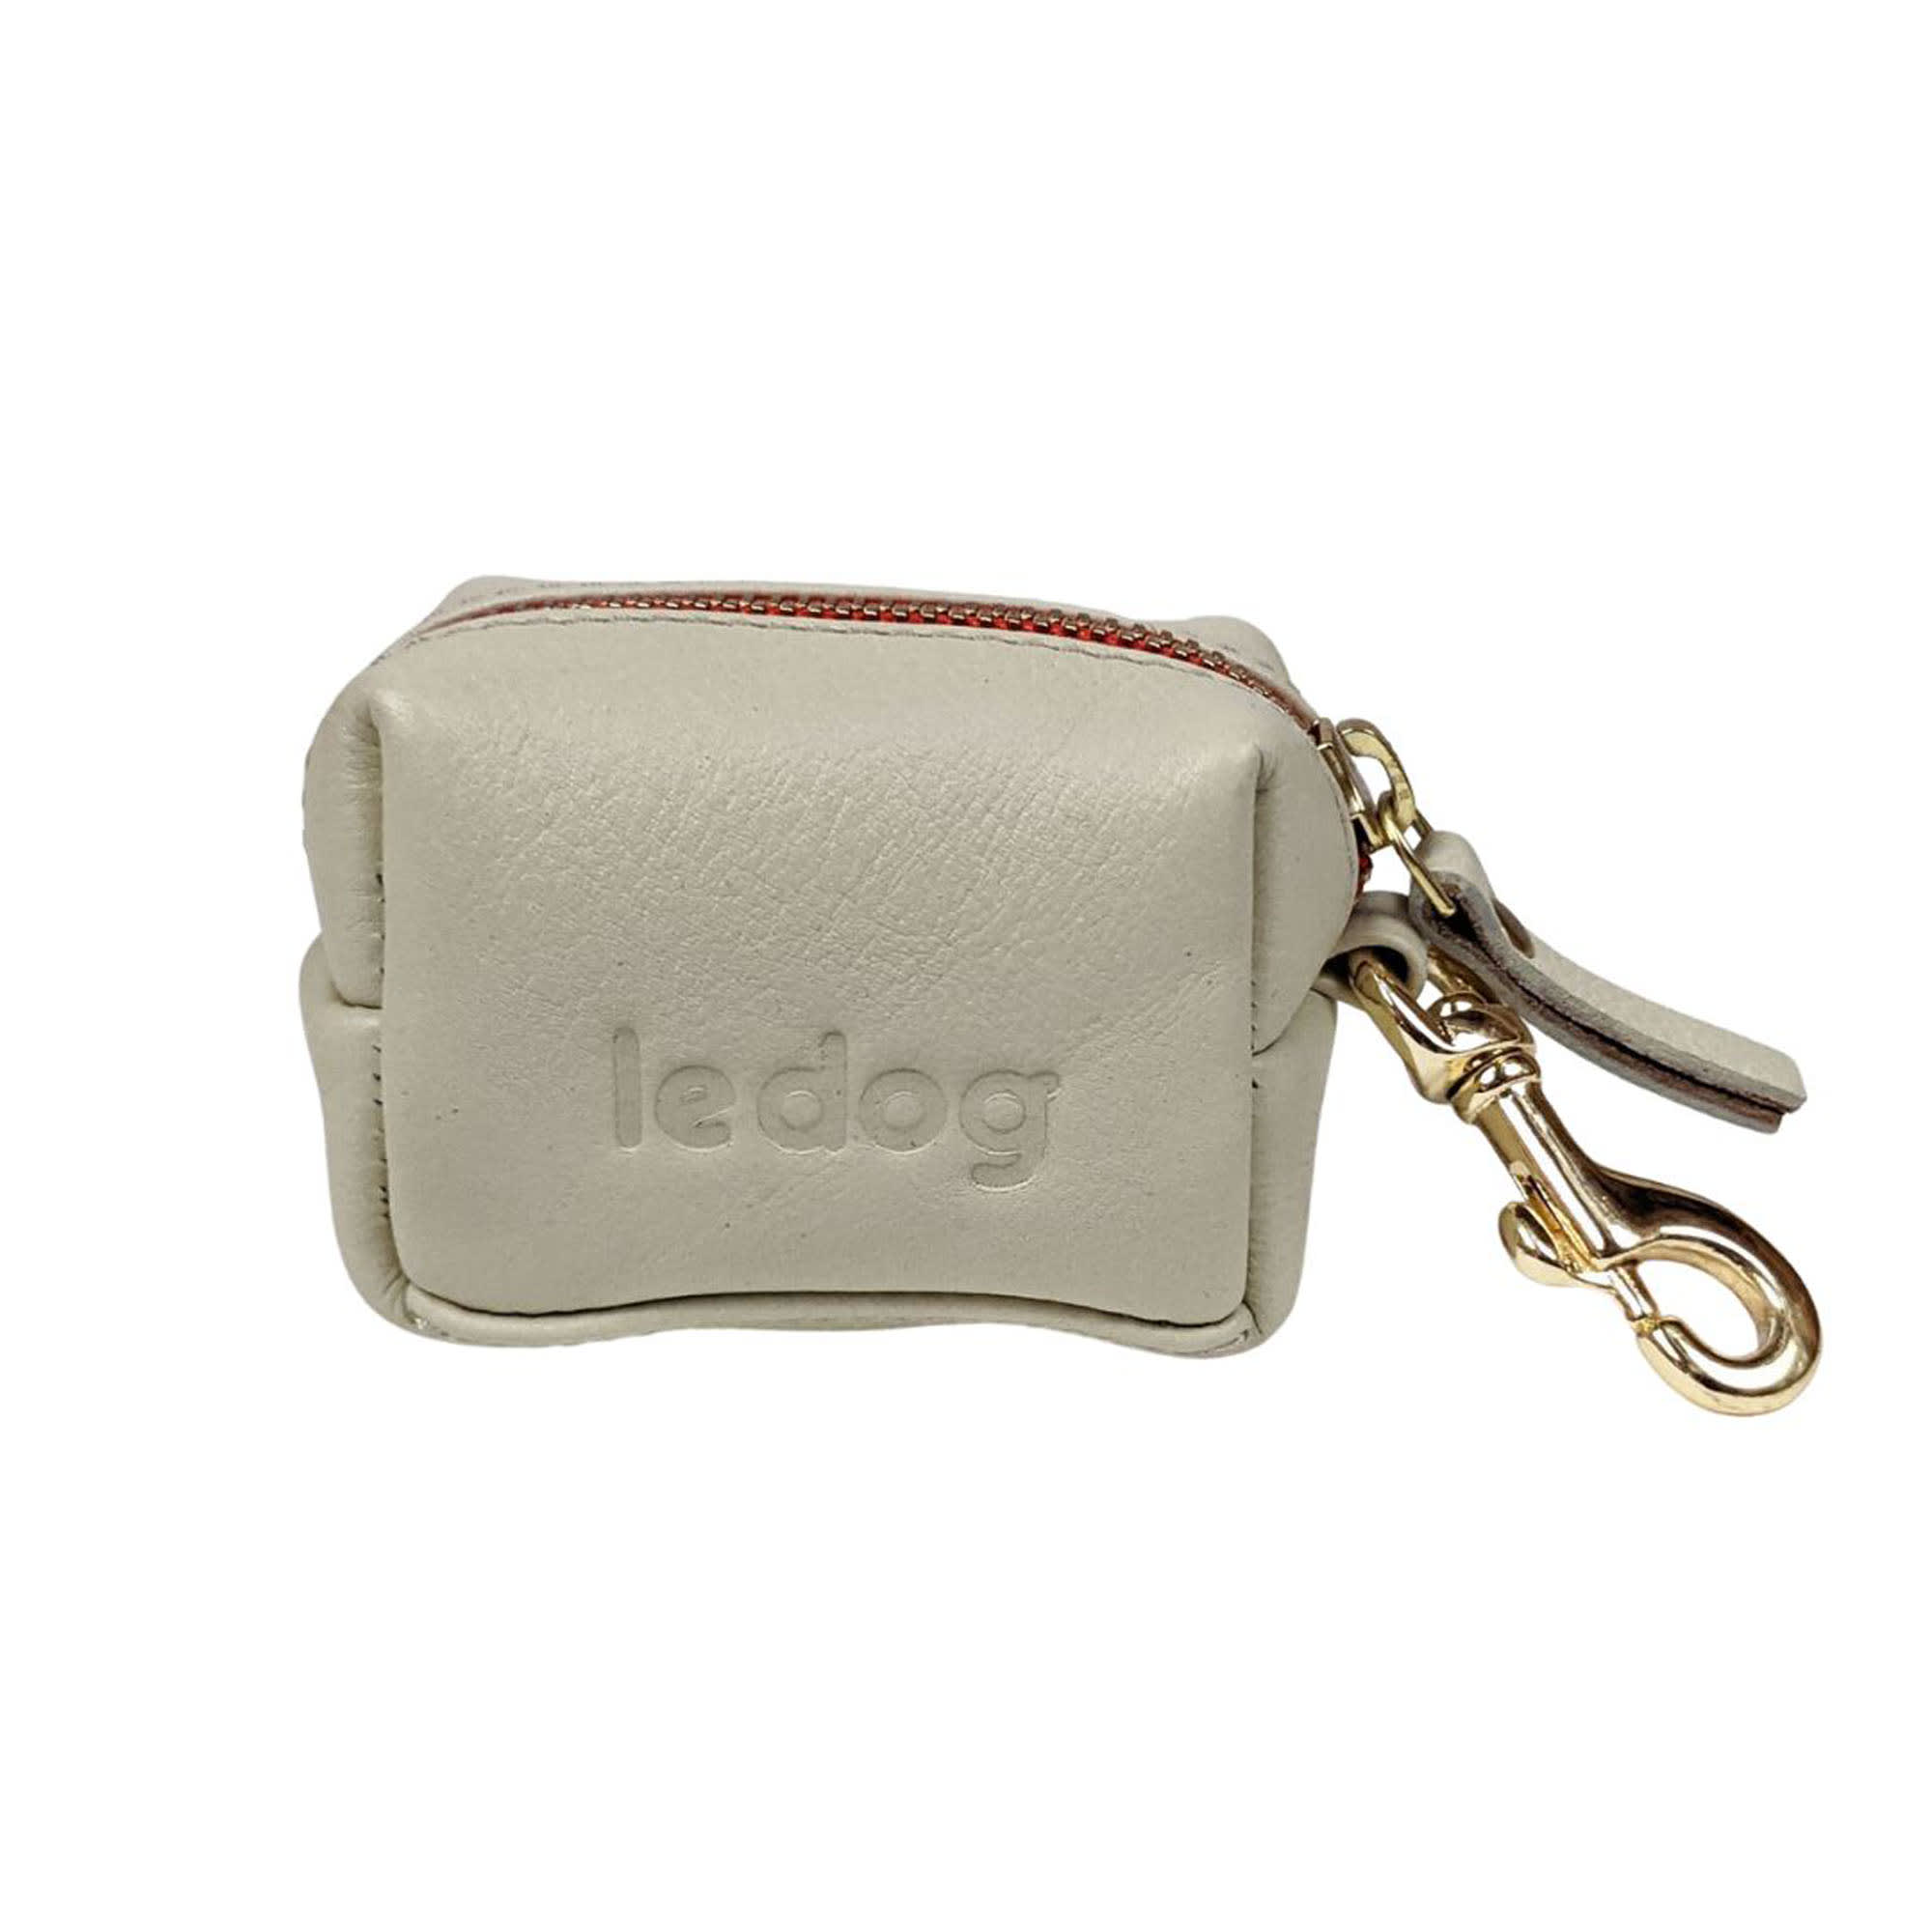 Le Dog Company Bone Leather Poop Bag Holder for Dogs | Petco